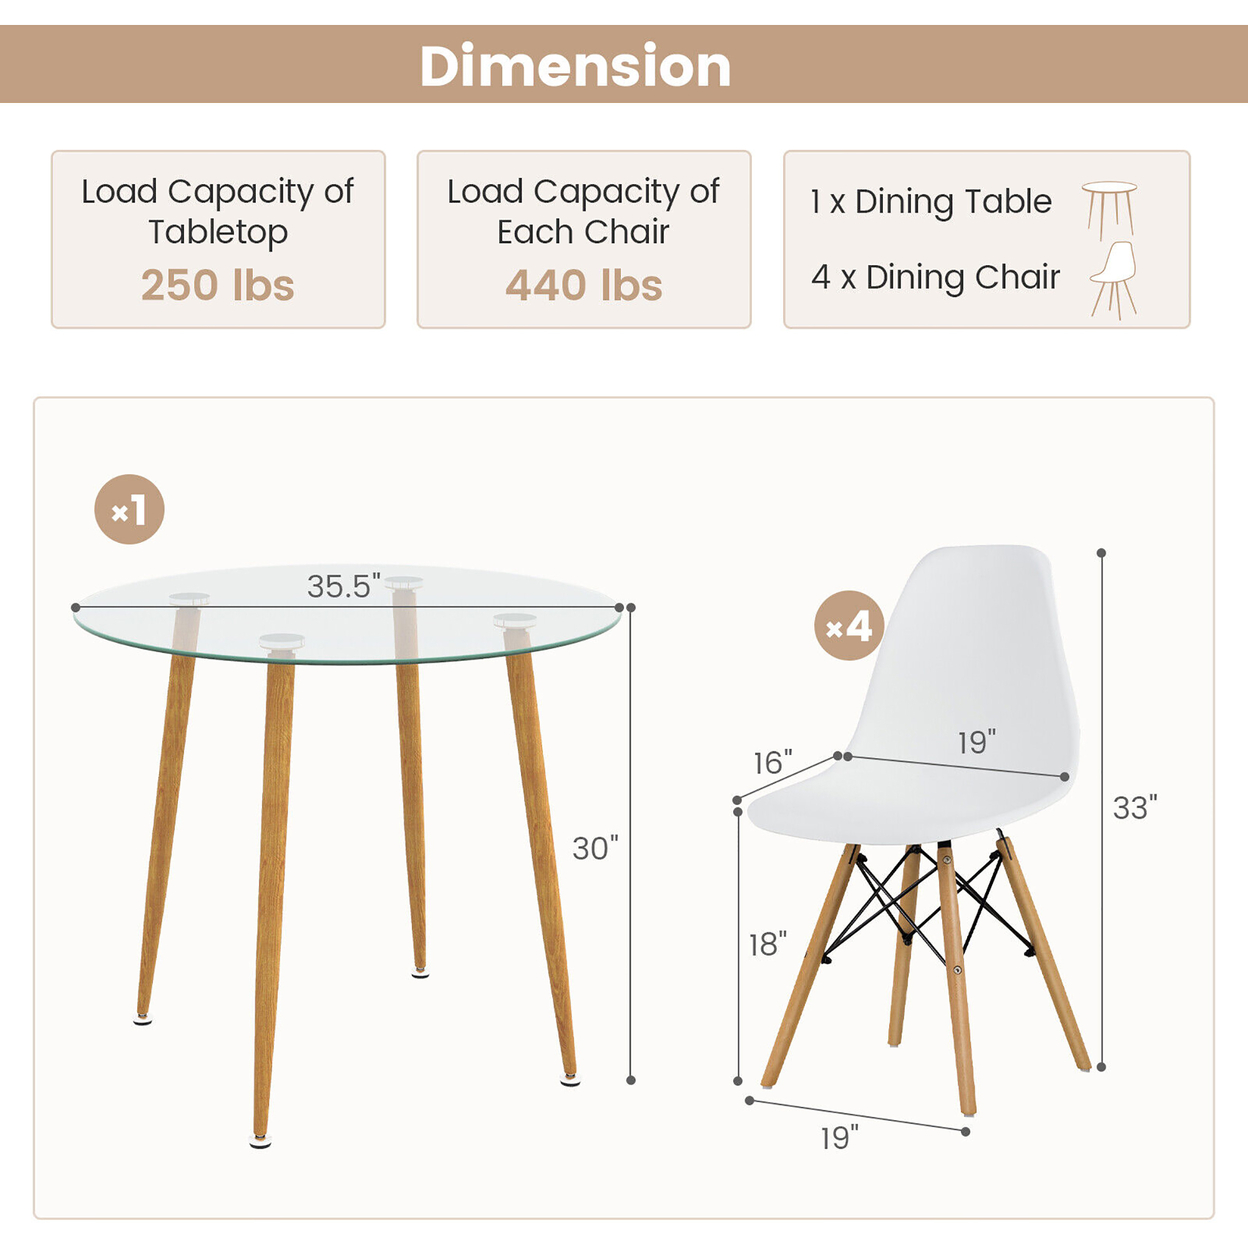 5 PCS Dining Table Set Tempered Glass Table 4 Chairs W/ Beech Wood Leg Kitchen